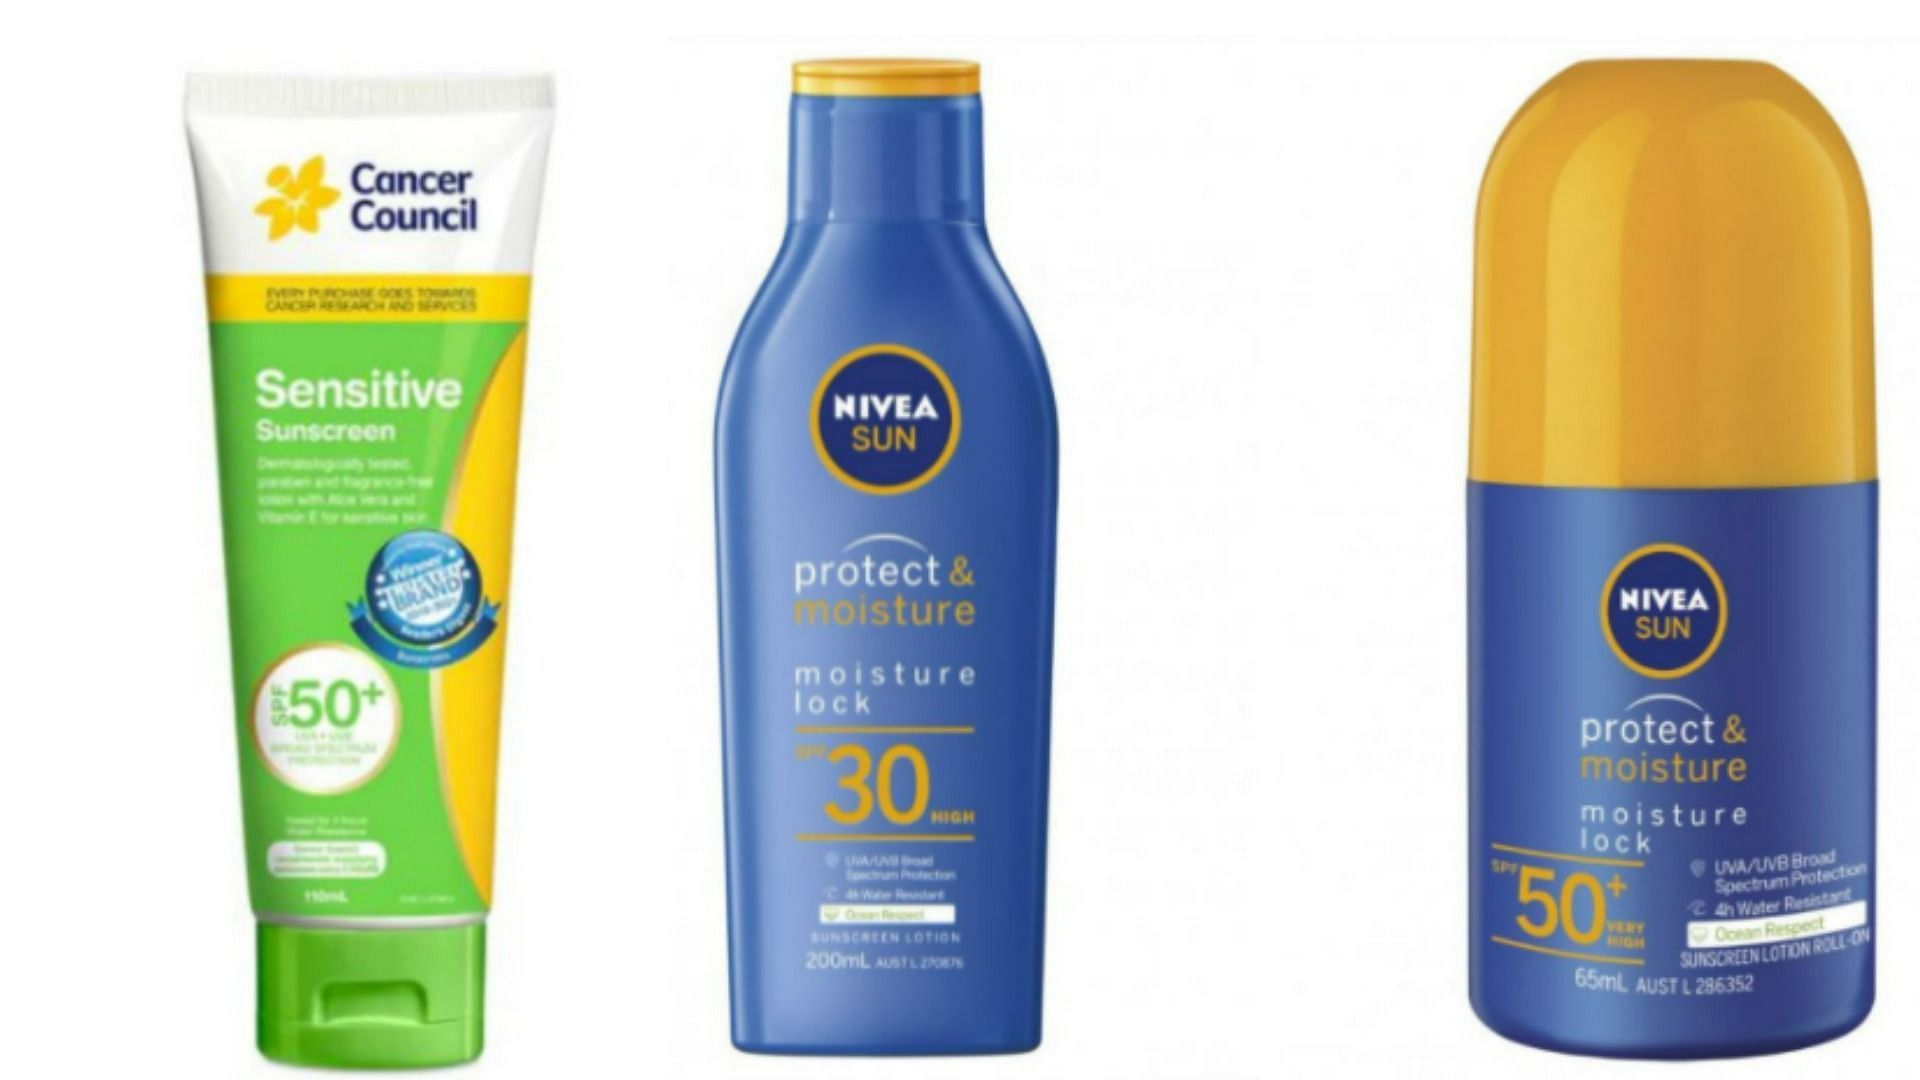 Sun-protectant recall initiated in Australia (Image via Amazon and Getty Images)